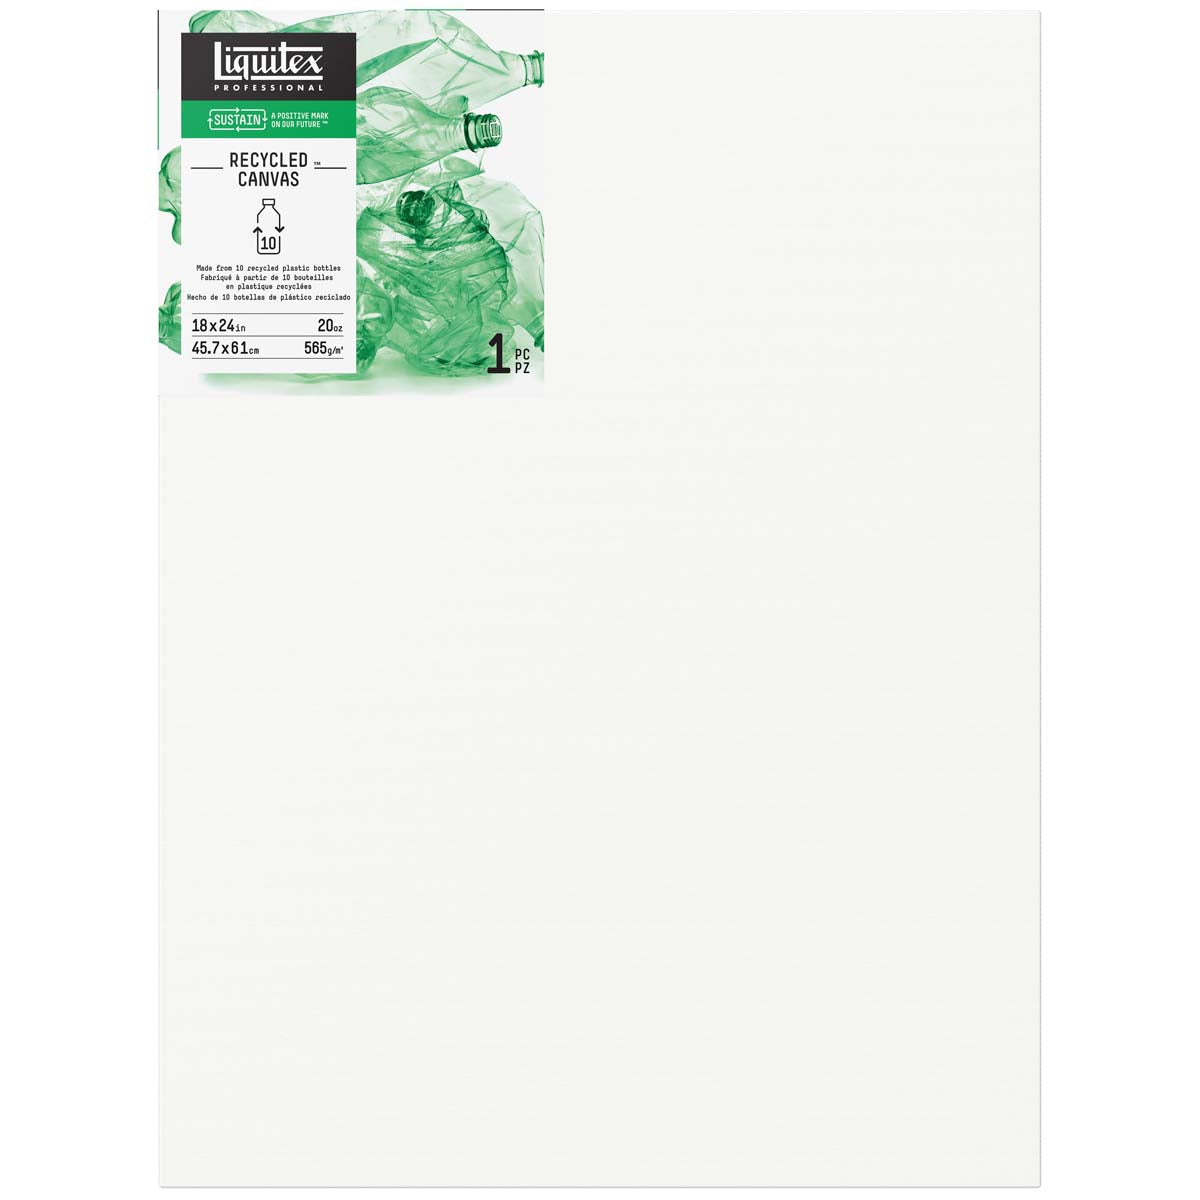 Liquitex Recycled Canvas - Standard Edge - 18x24 inches - 46x60cm